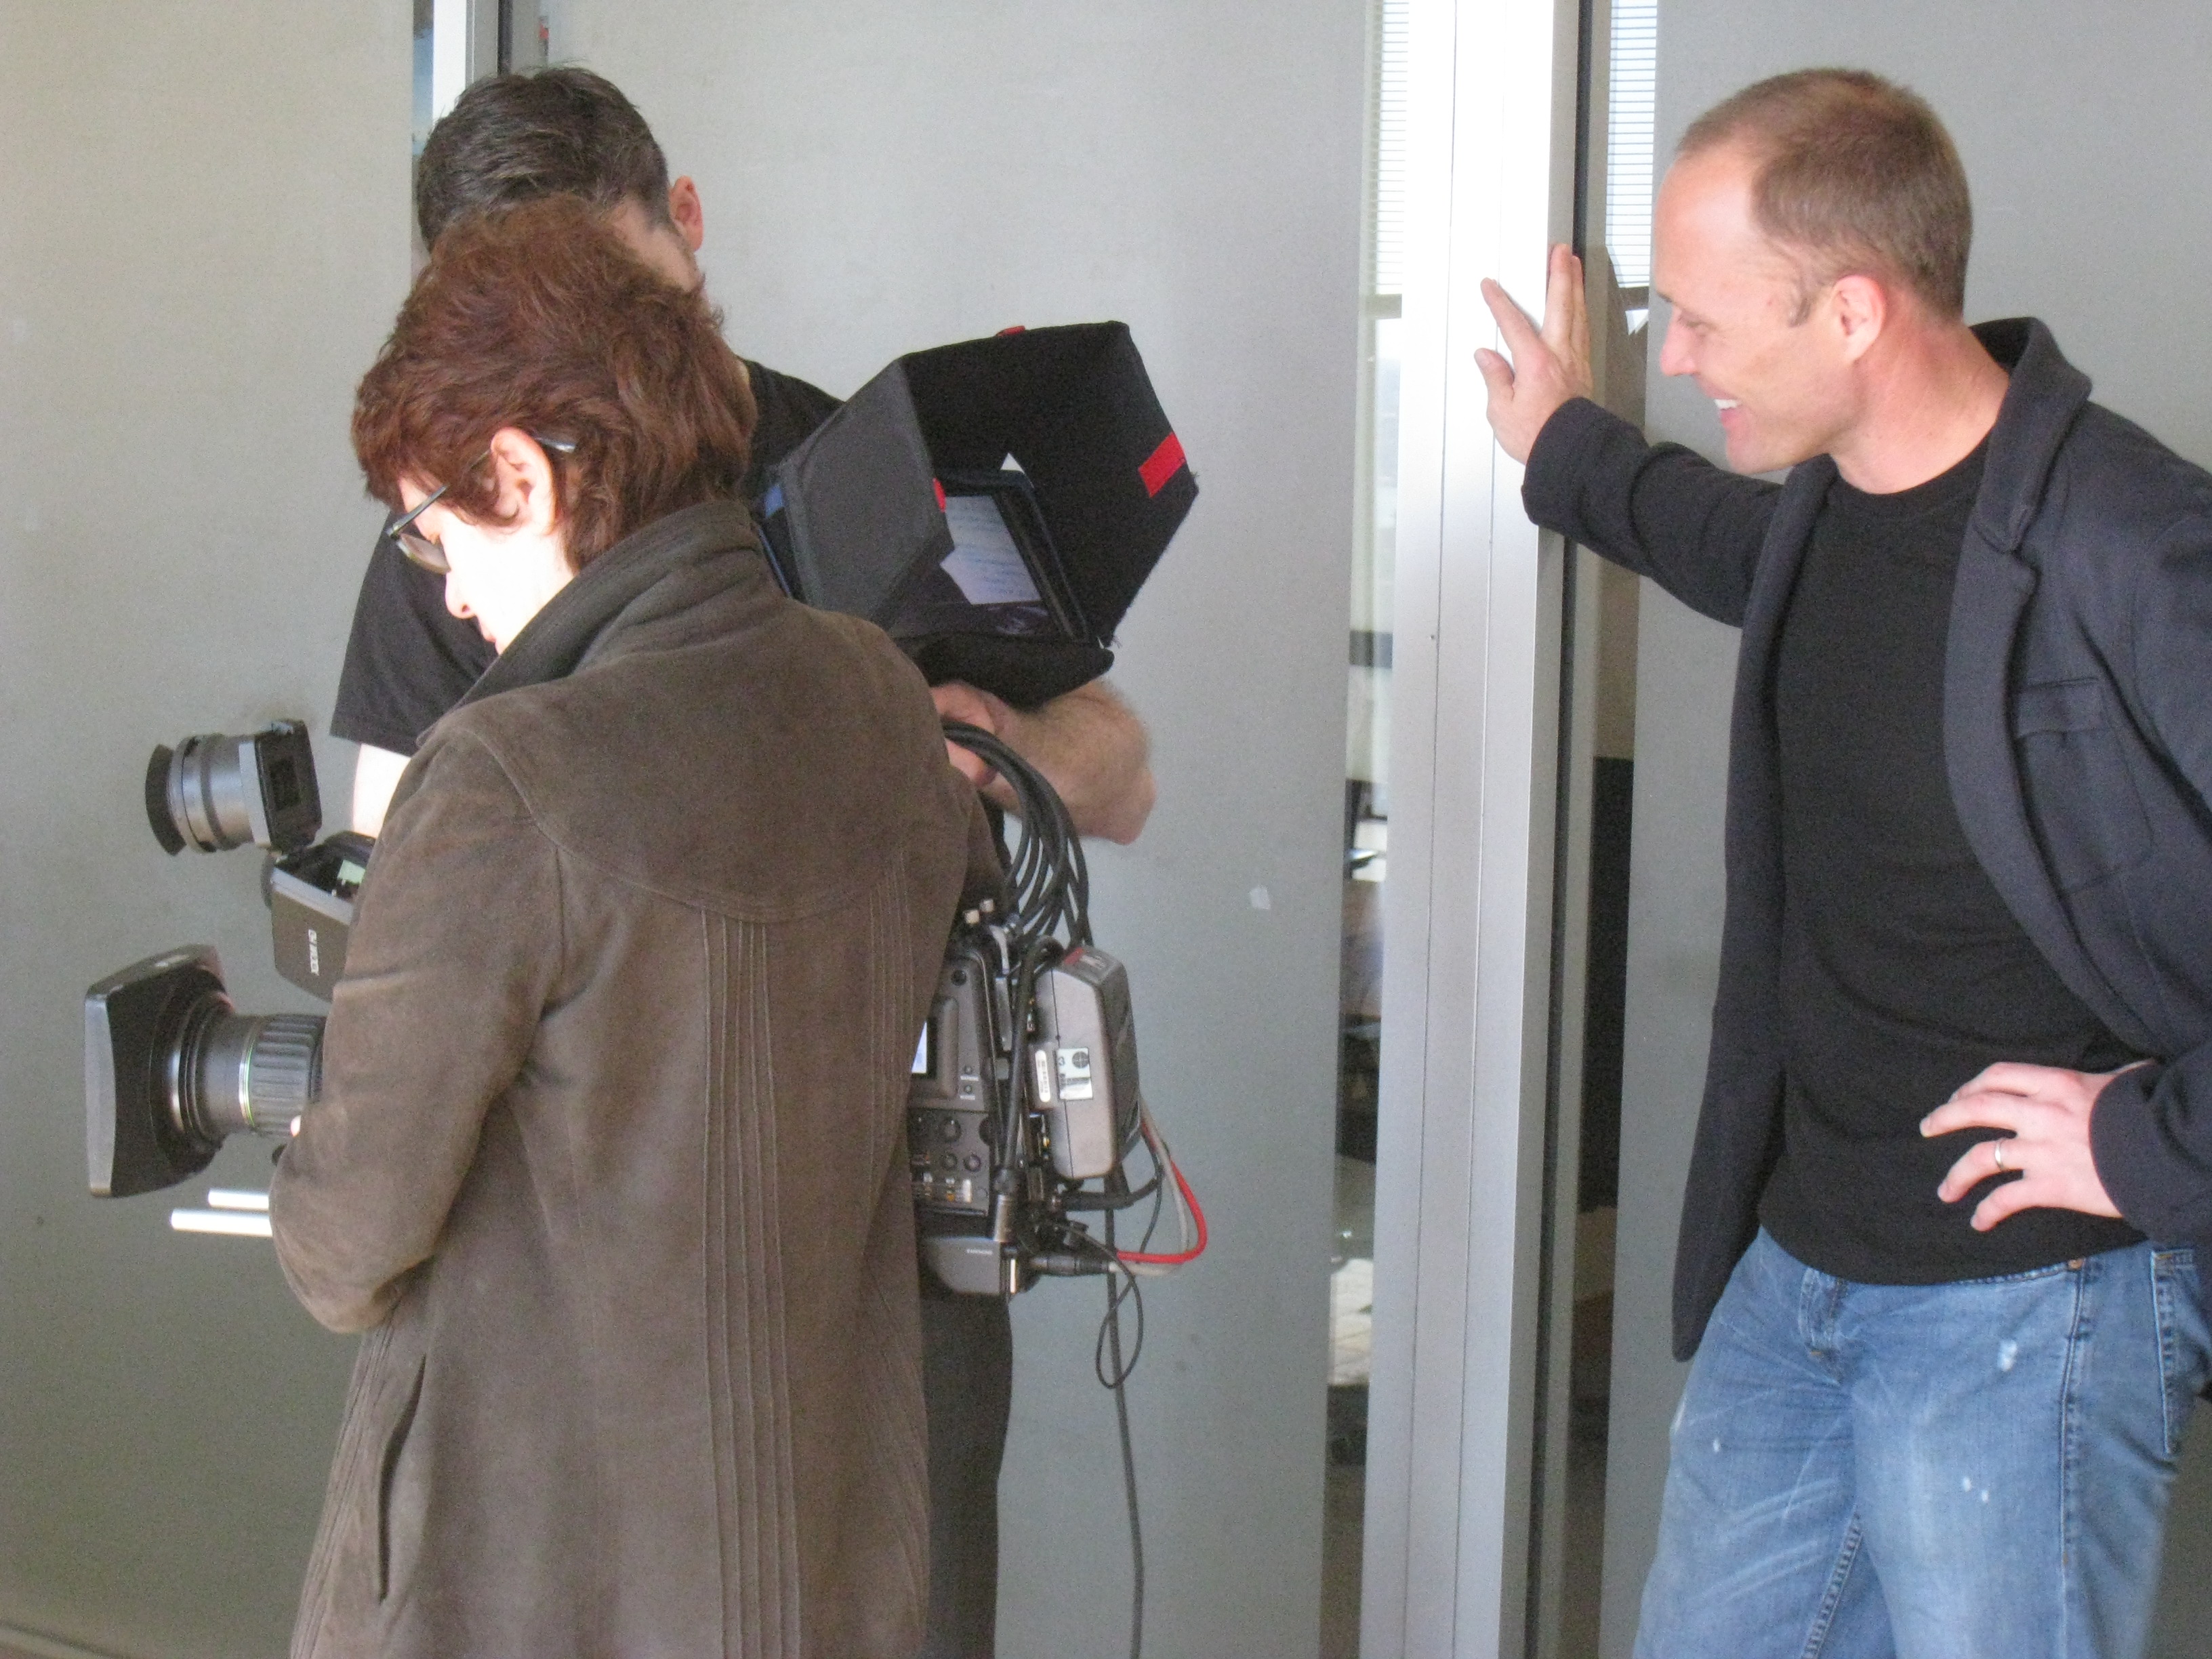 Director Jim Houck, right, on set at Rolling Stone magazine with cinematographer Maryse Alberti.